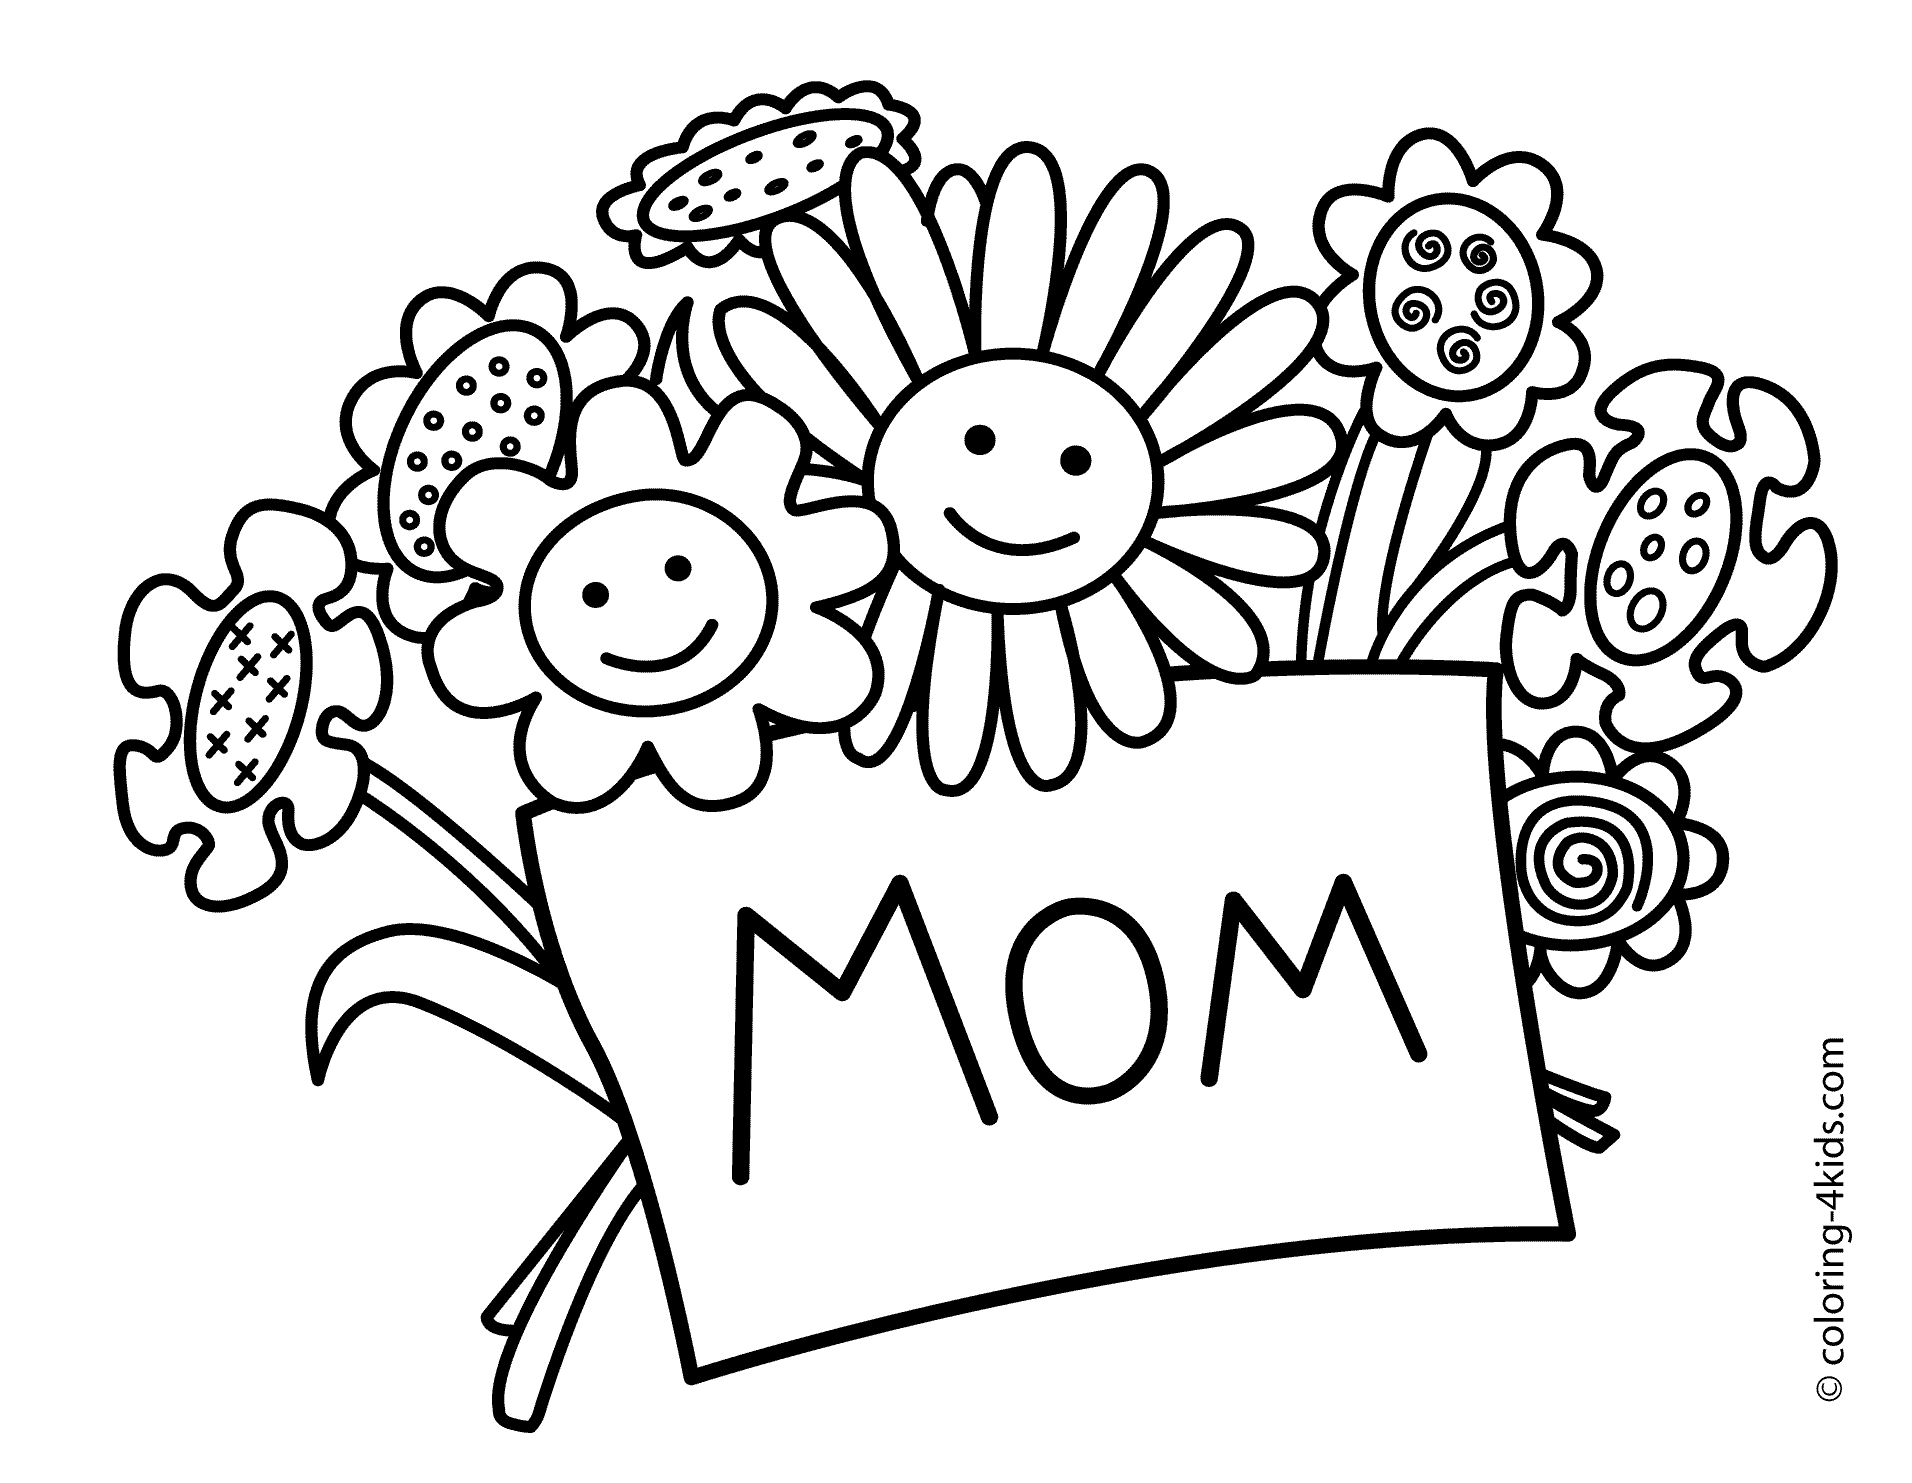 mothers day coloring pages mother39s day coloring pages to celebrate the best mom day mothers coloring pages 